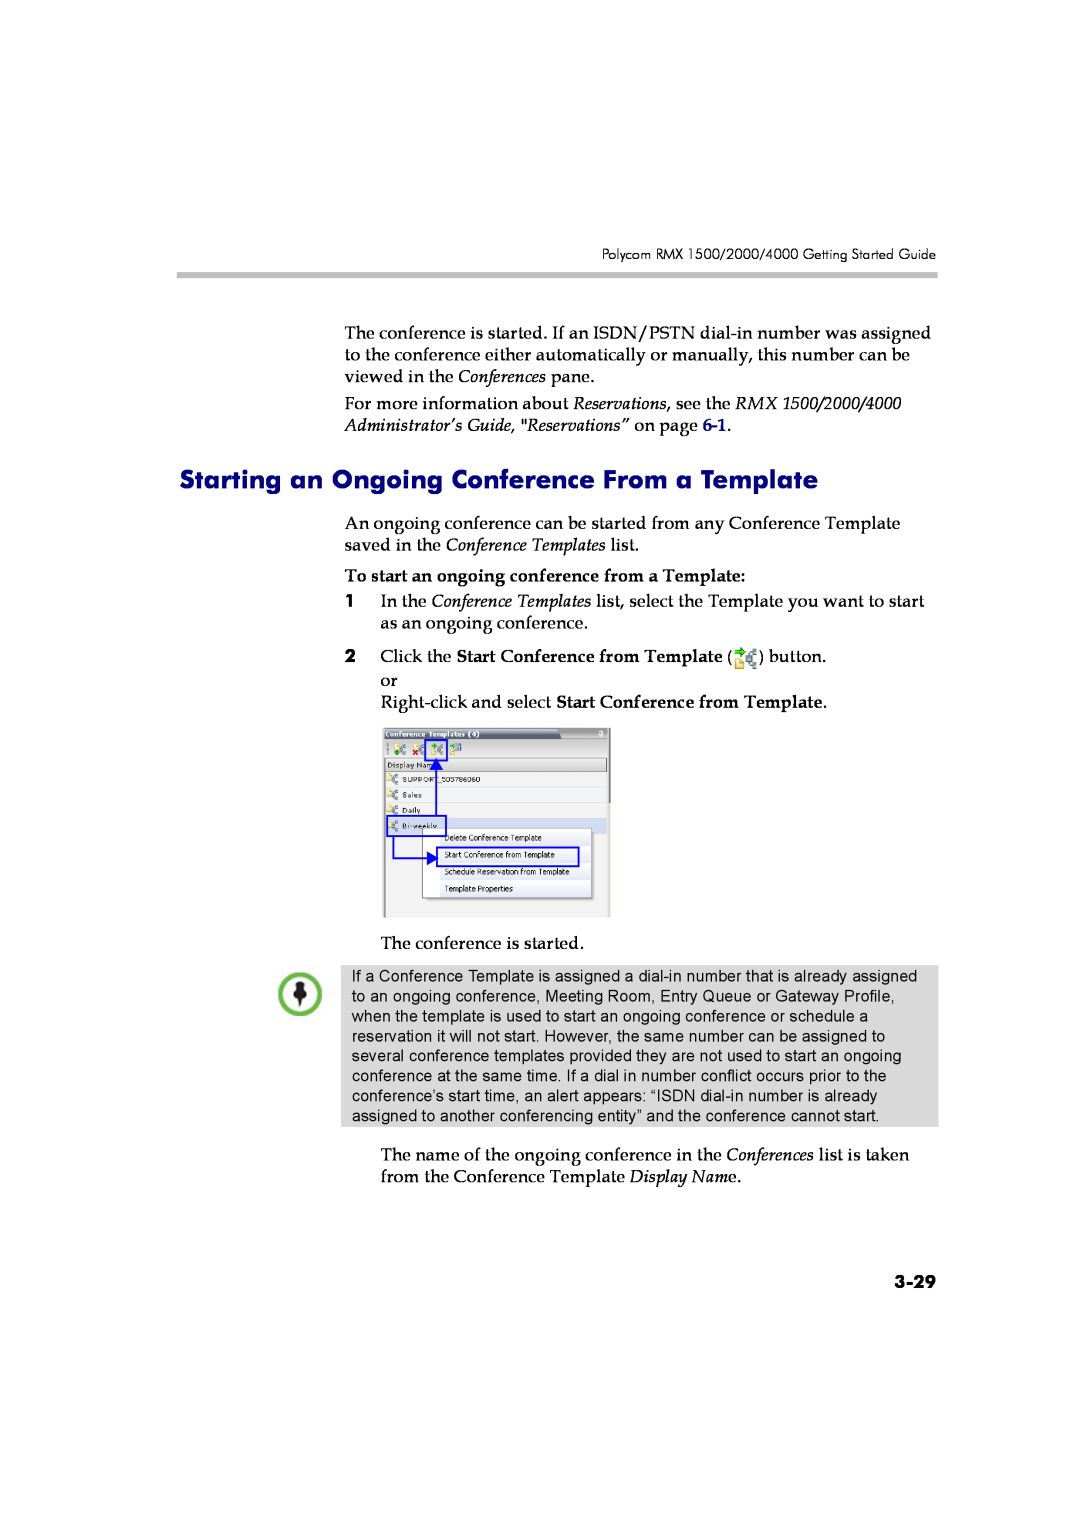 Polycom DOC2560B manual Starting an Ongoing Conference From a Template, Administrator’s Guide, Reservations” on page, 3-29 